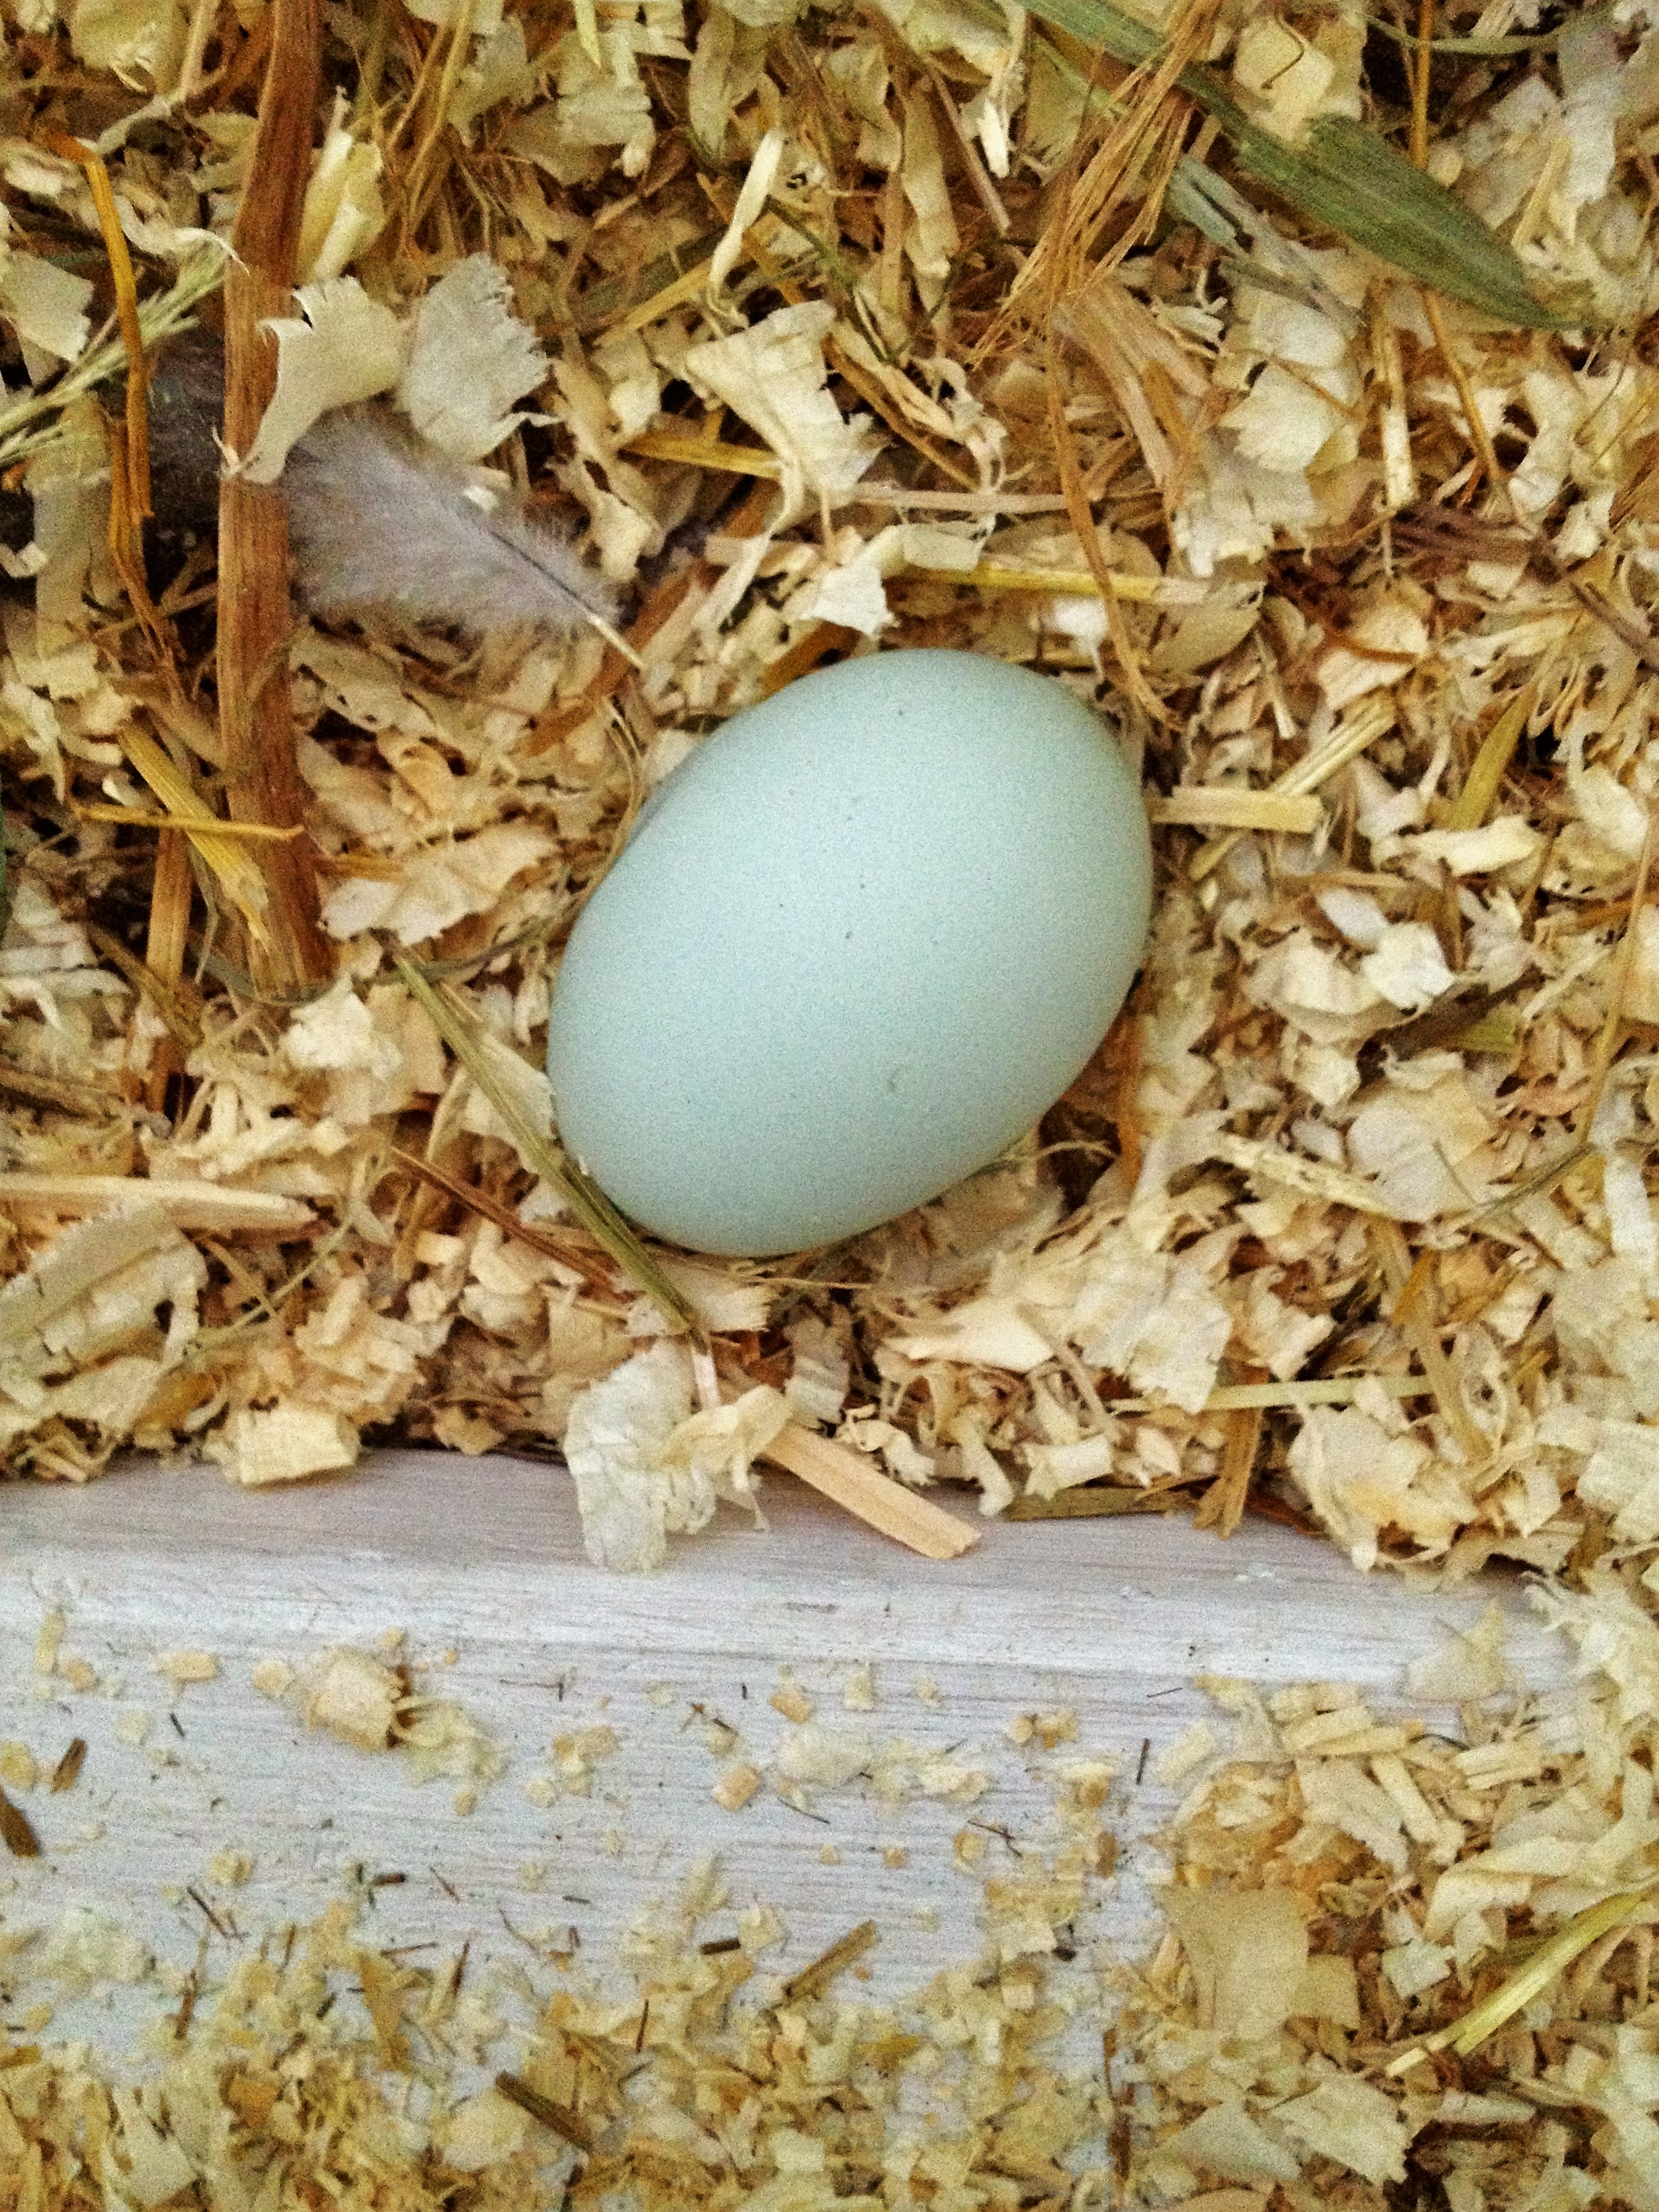 Our 1st egg!!!